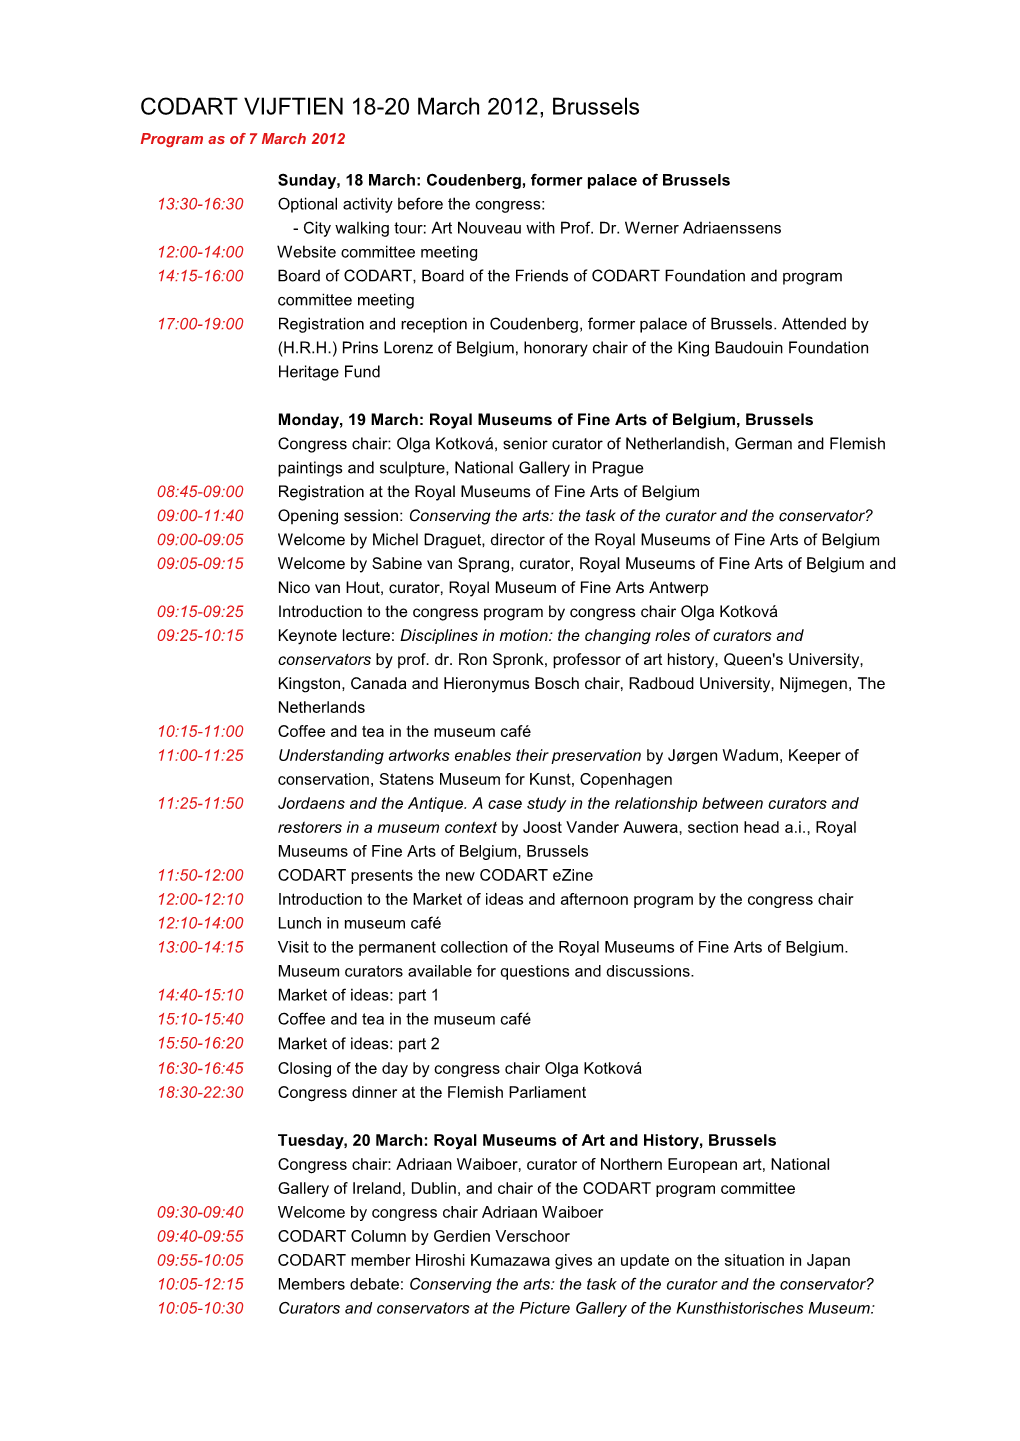 Congress Program by Congress Chair Olga Kotková 09:25-10:15 Keynote Lecture: Disciplines in Motion: the Changing Roles of Curators and Conservators by Prof